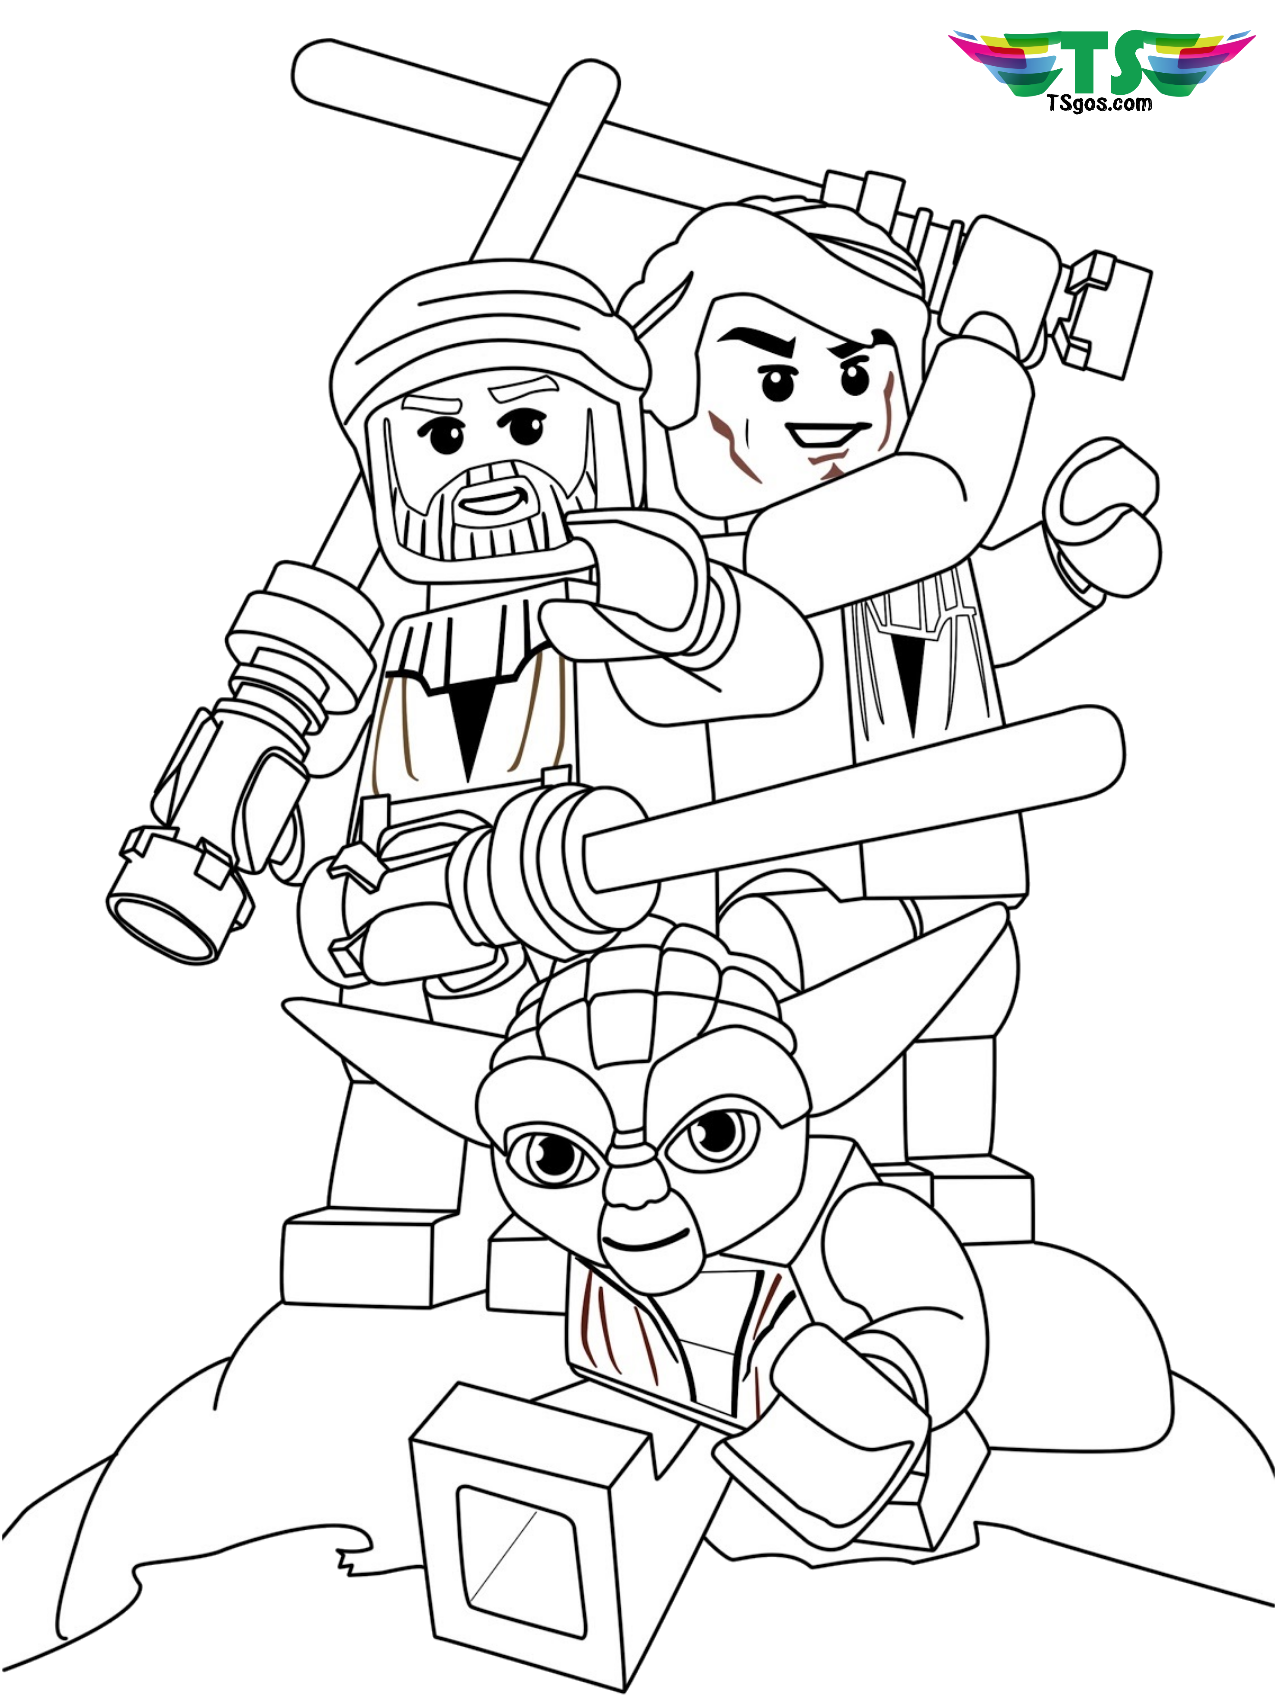 Star Wars lego coloring page.